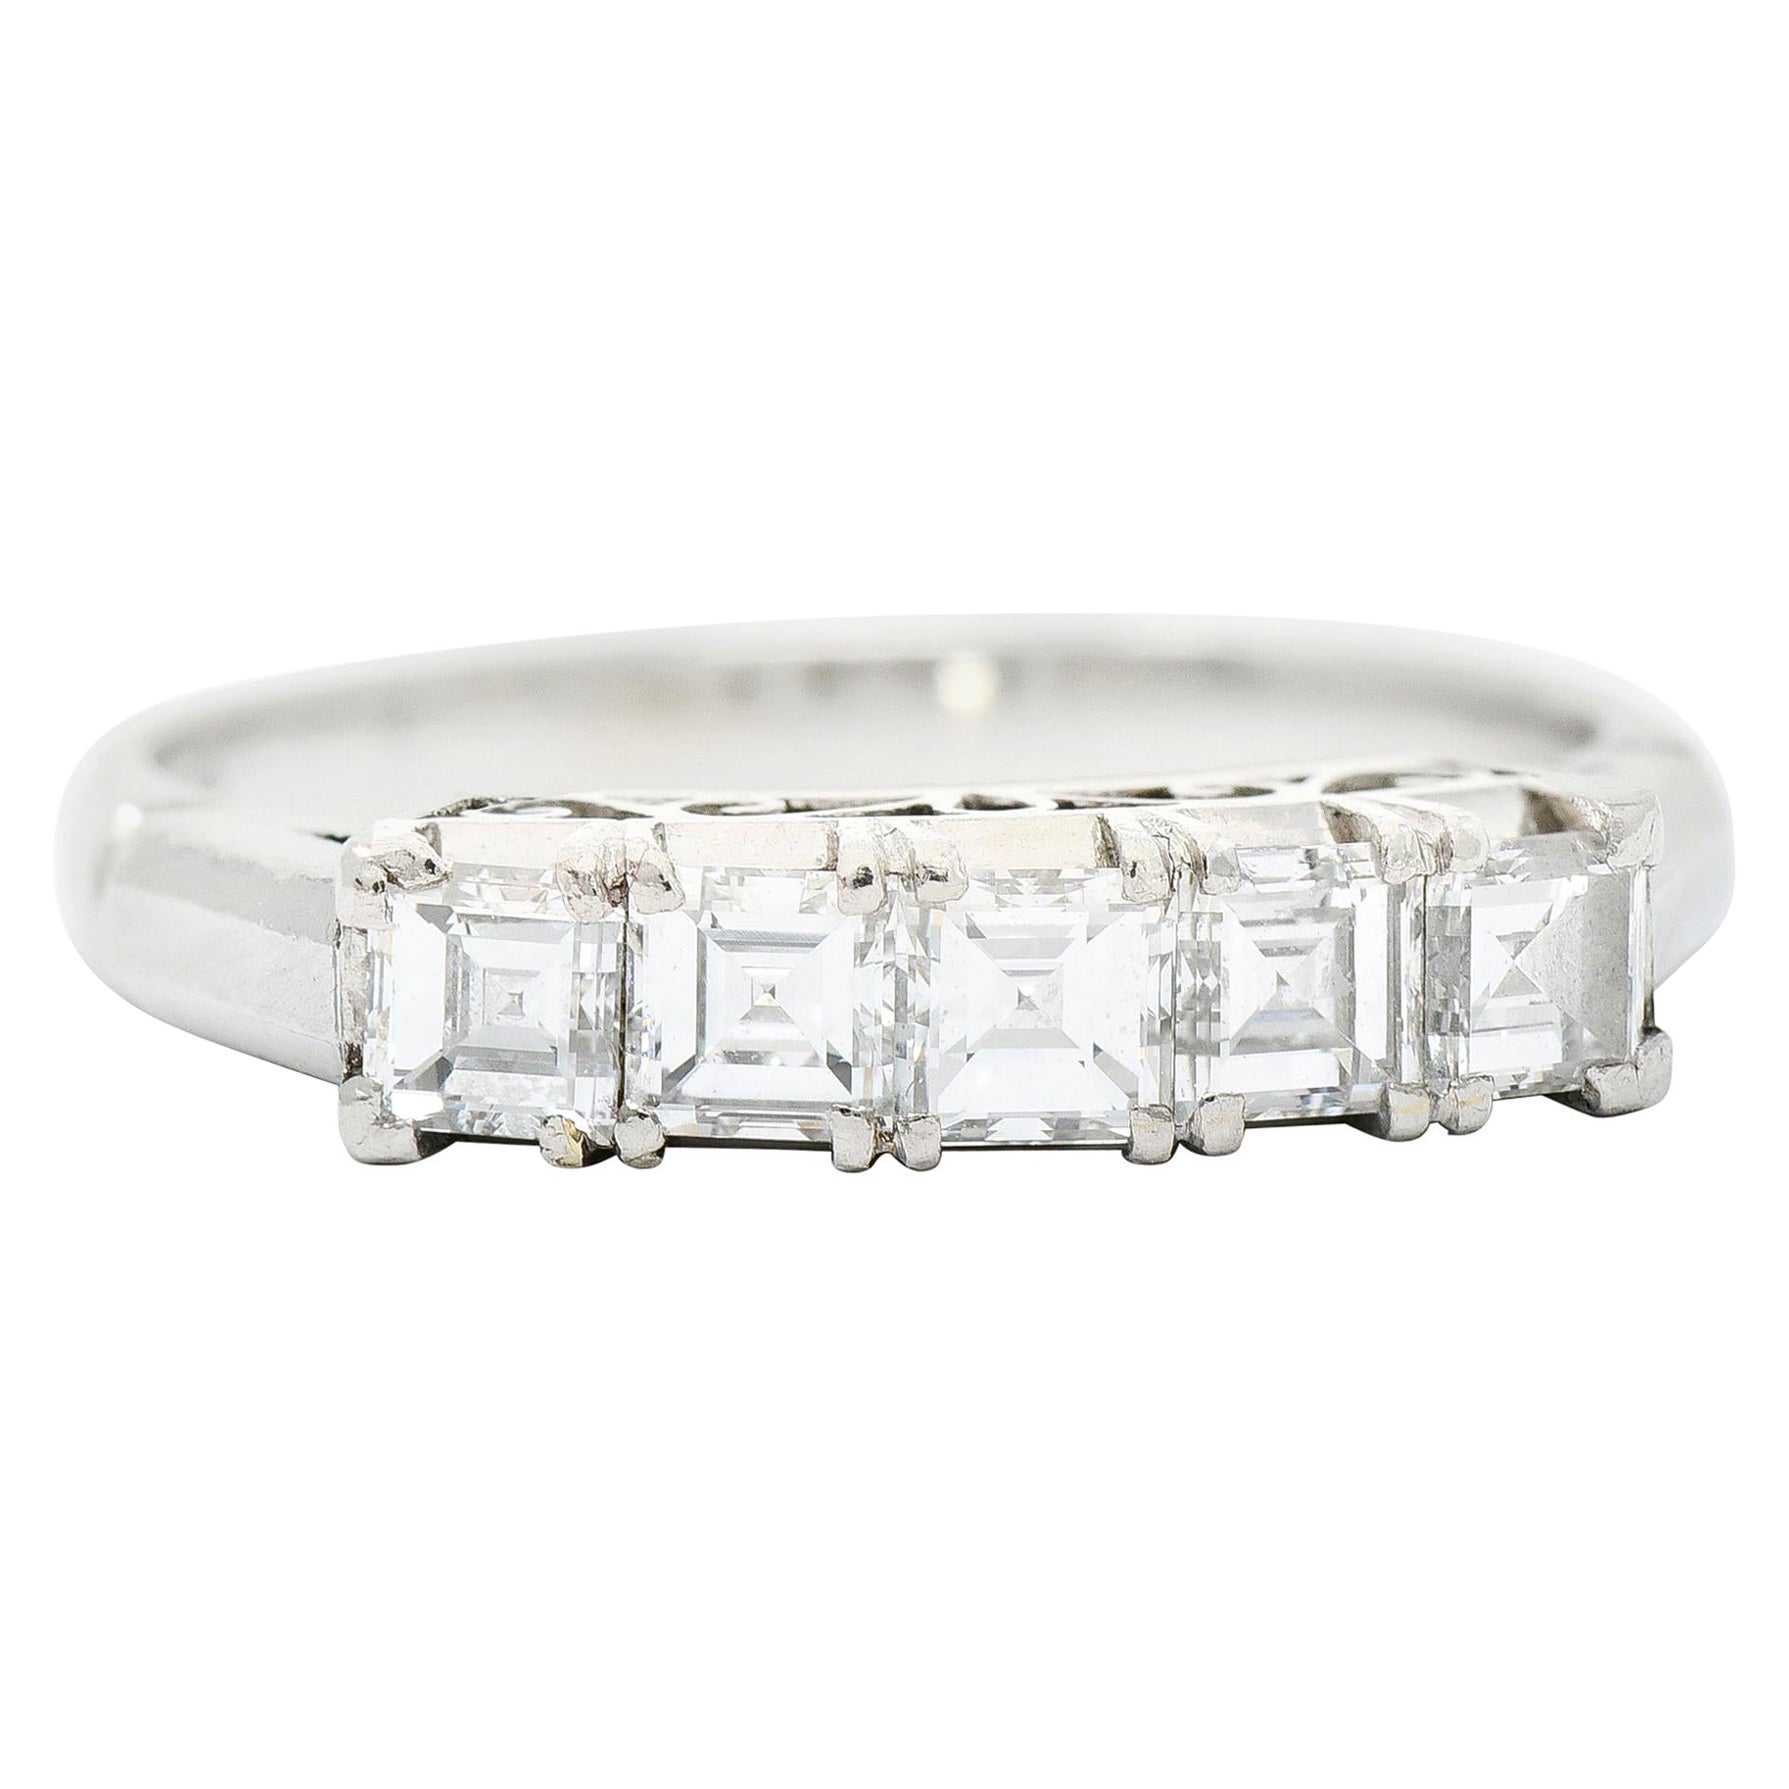 Endearing 0.78 Carat Diamond Platinum Five Stone Band Ring For Sale